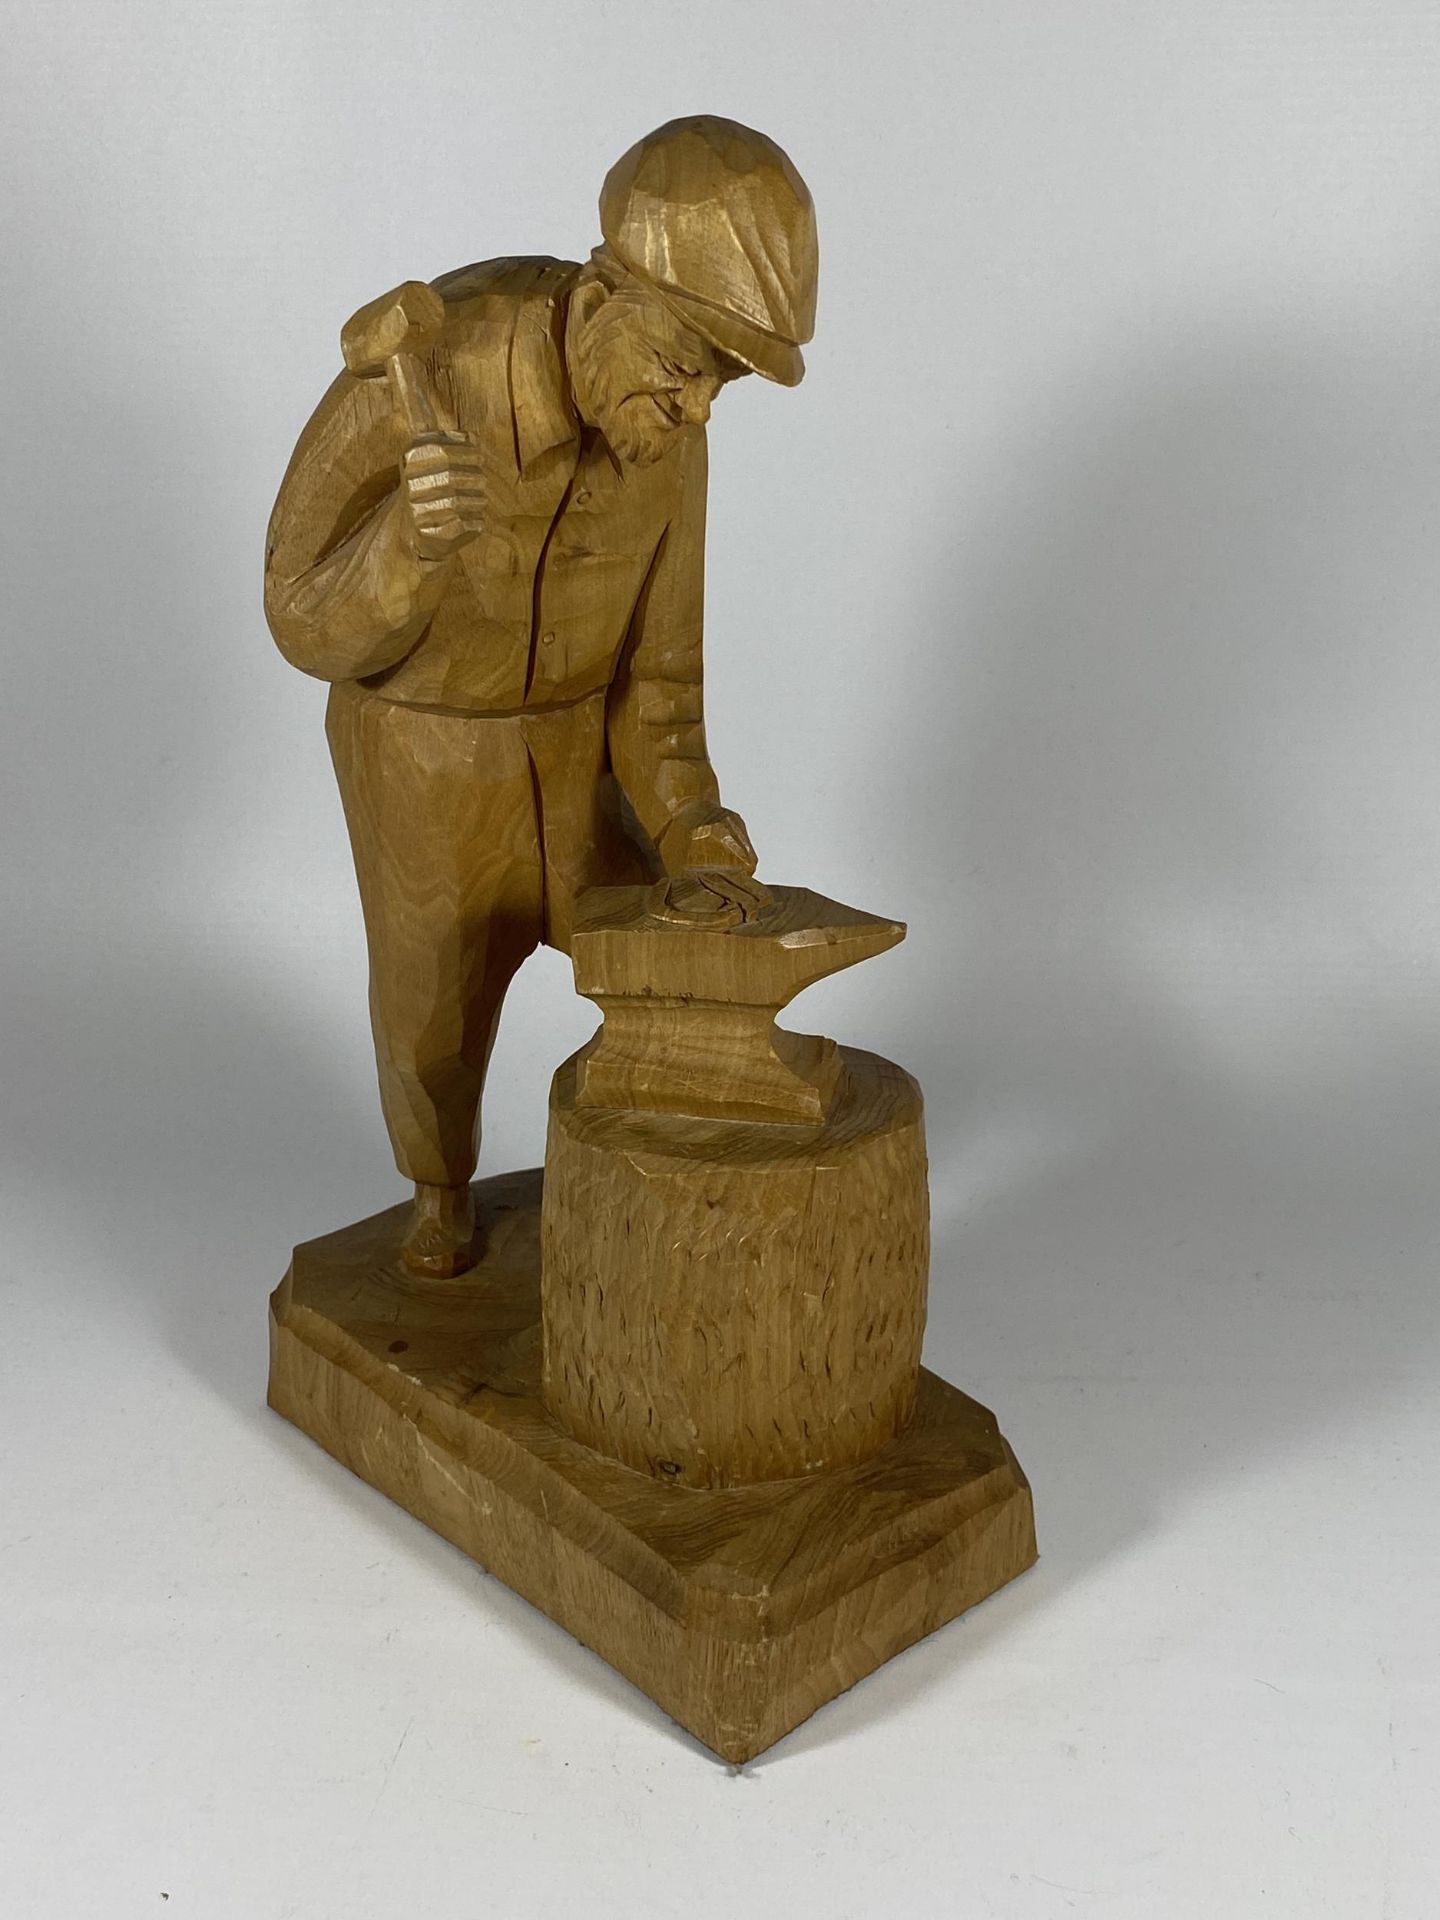 A CARVED WOODEN MODEL OF A BLACKSMITH